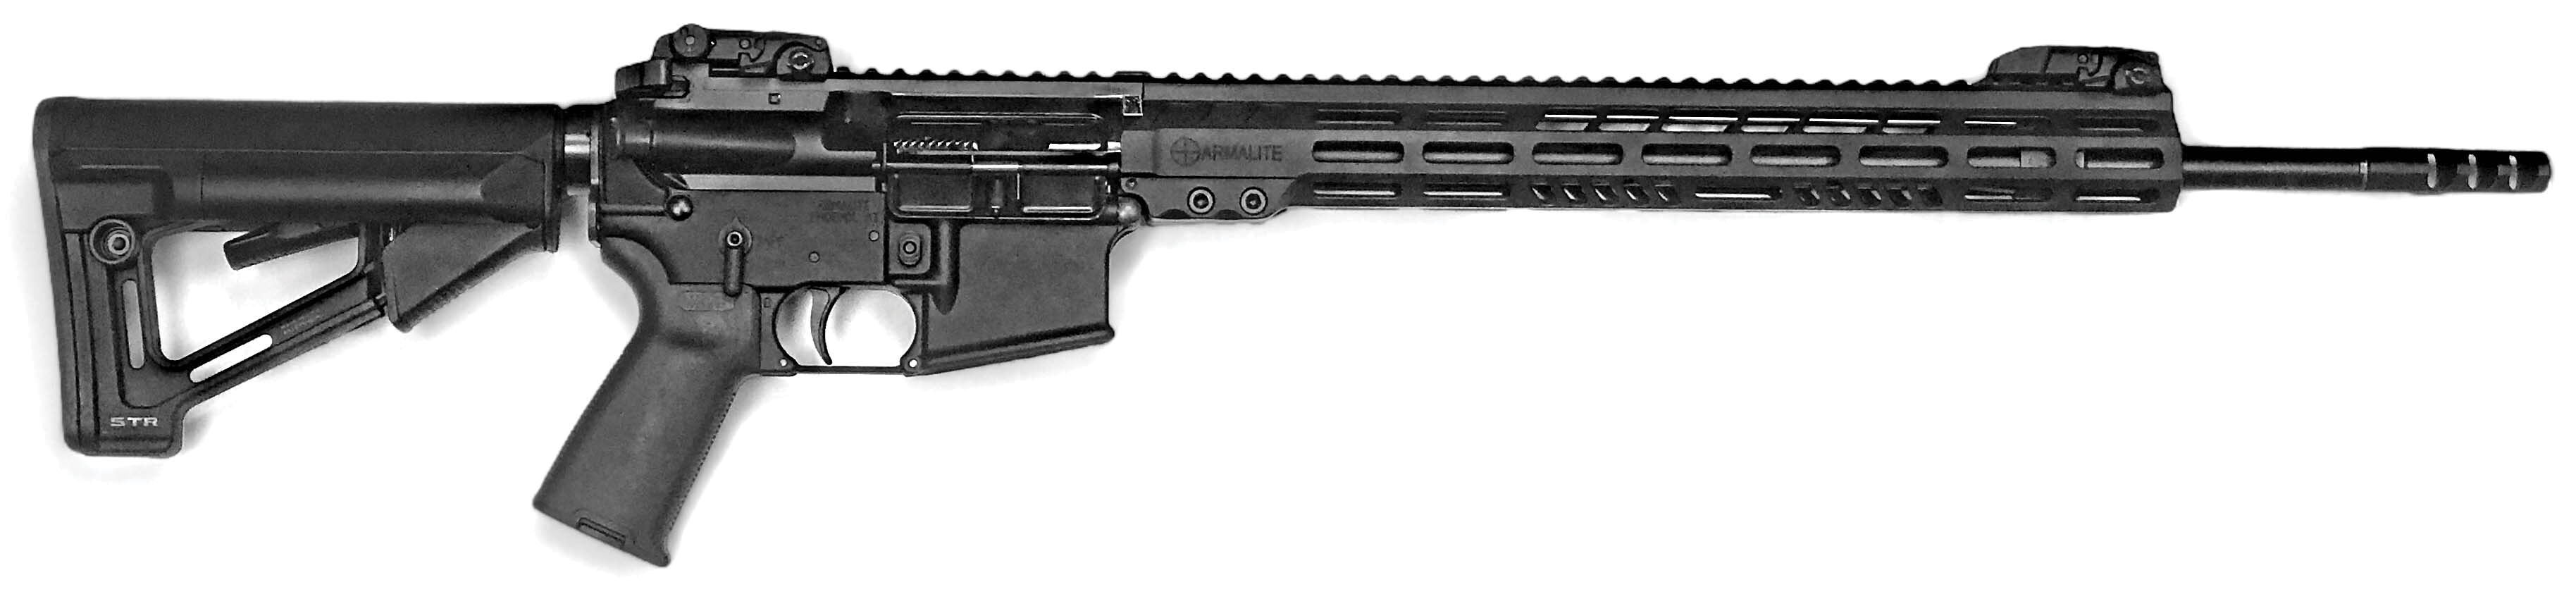 M-15 Tactical Rifle